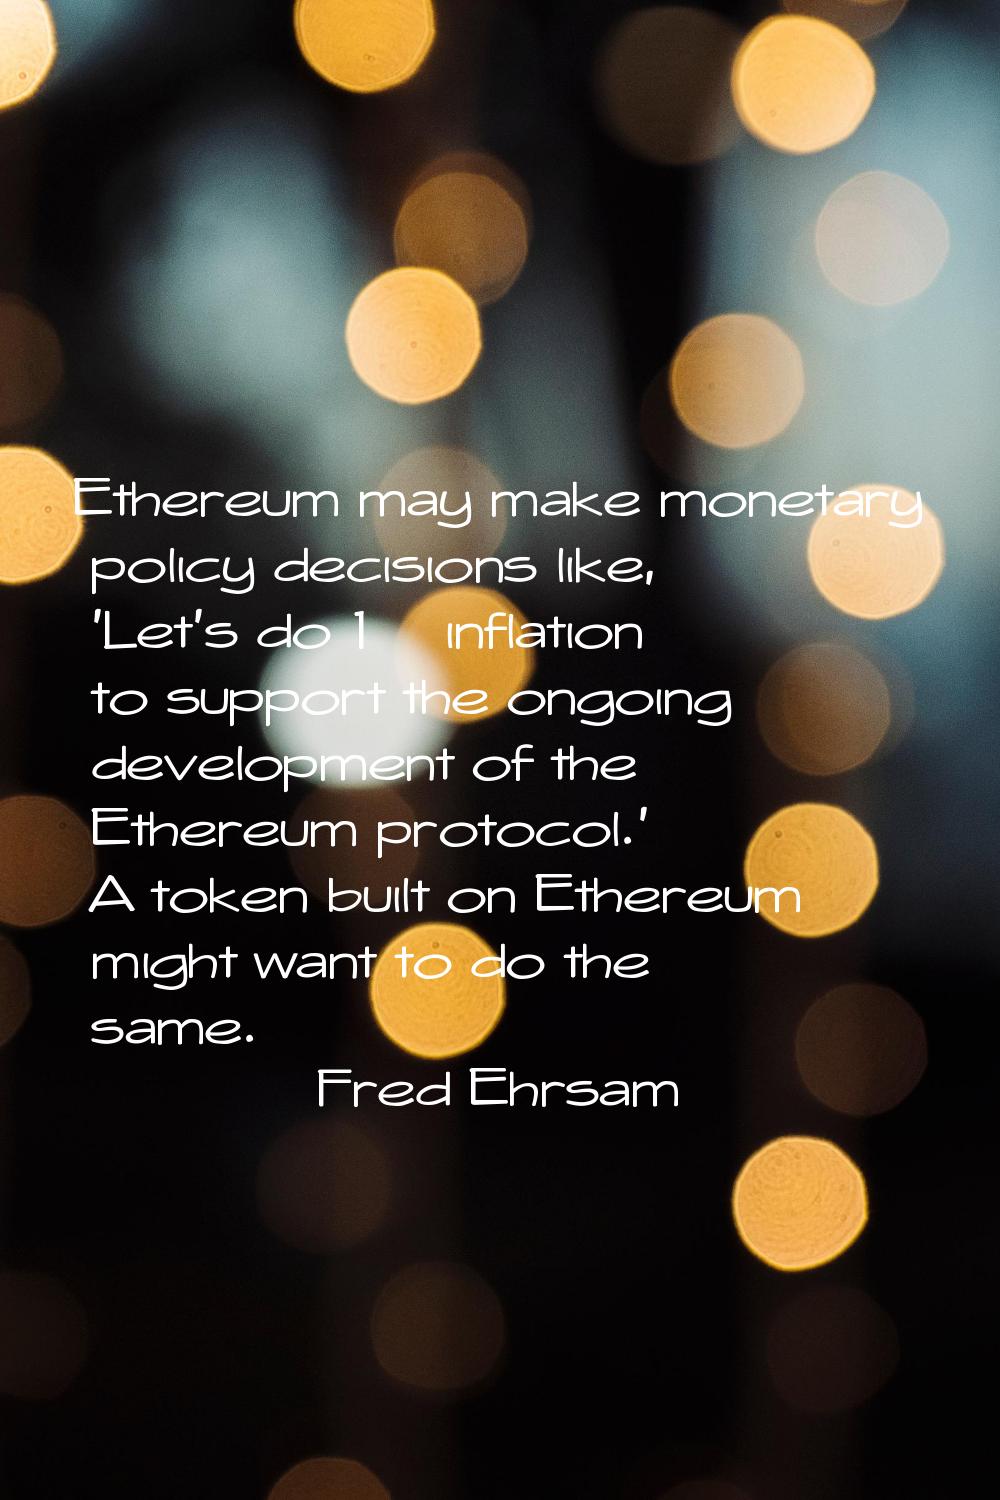 Ethereum may make monetary policy decisions like, 'Let's do 1% inflation to support the ongoing dev